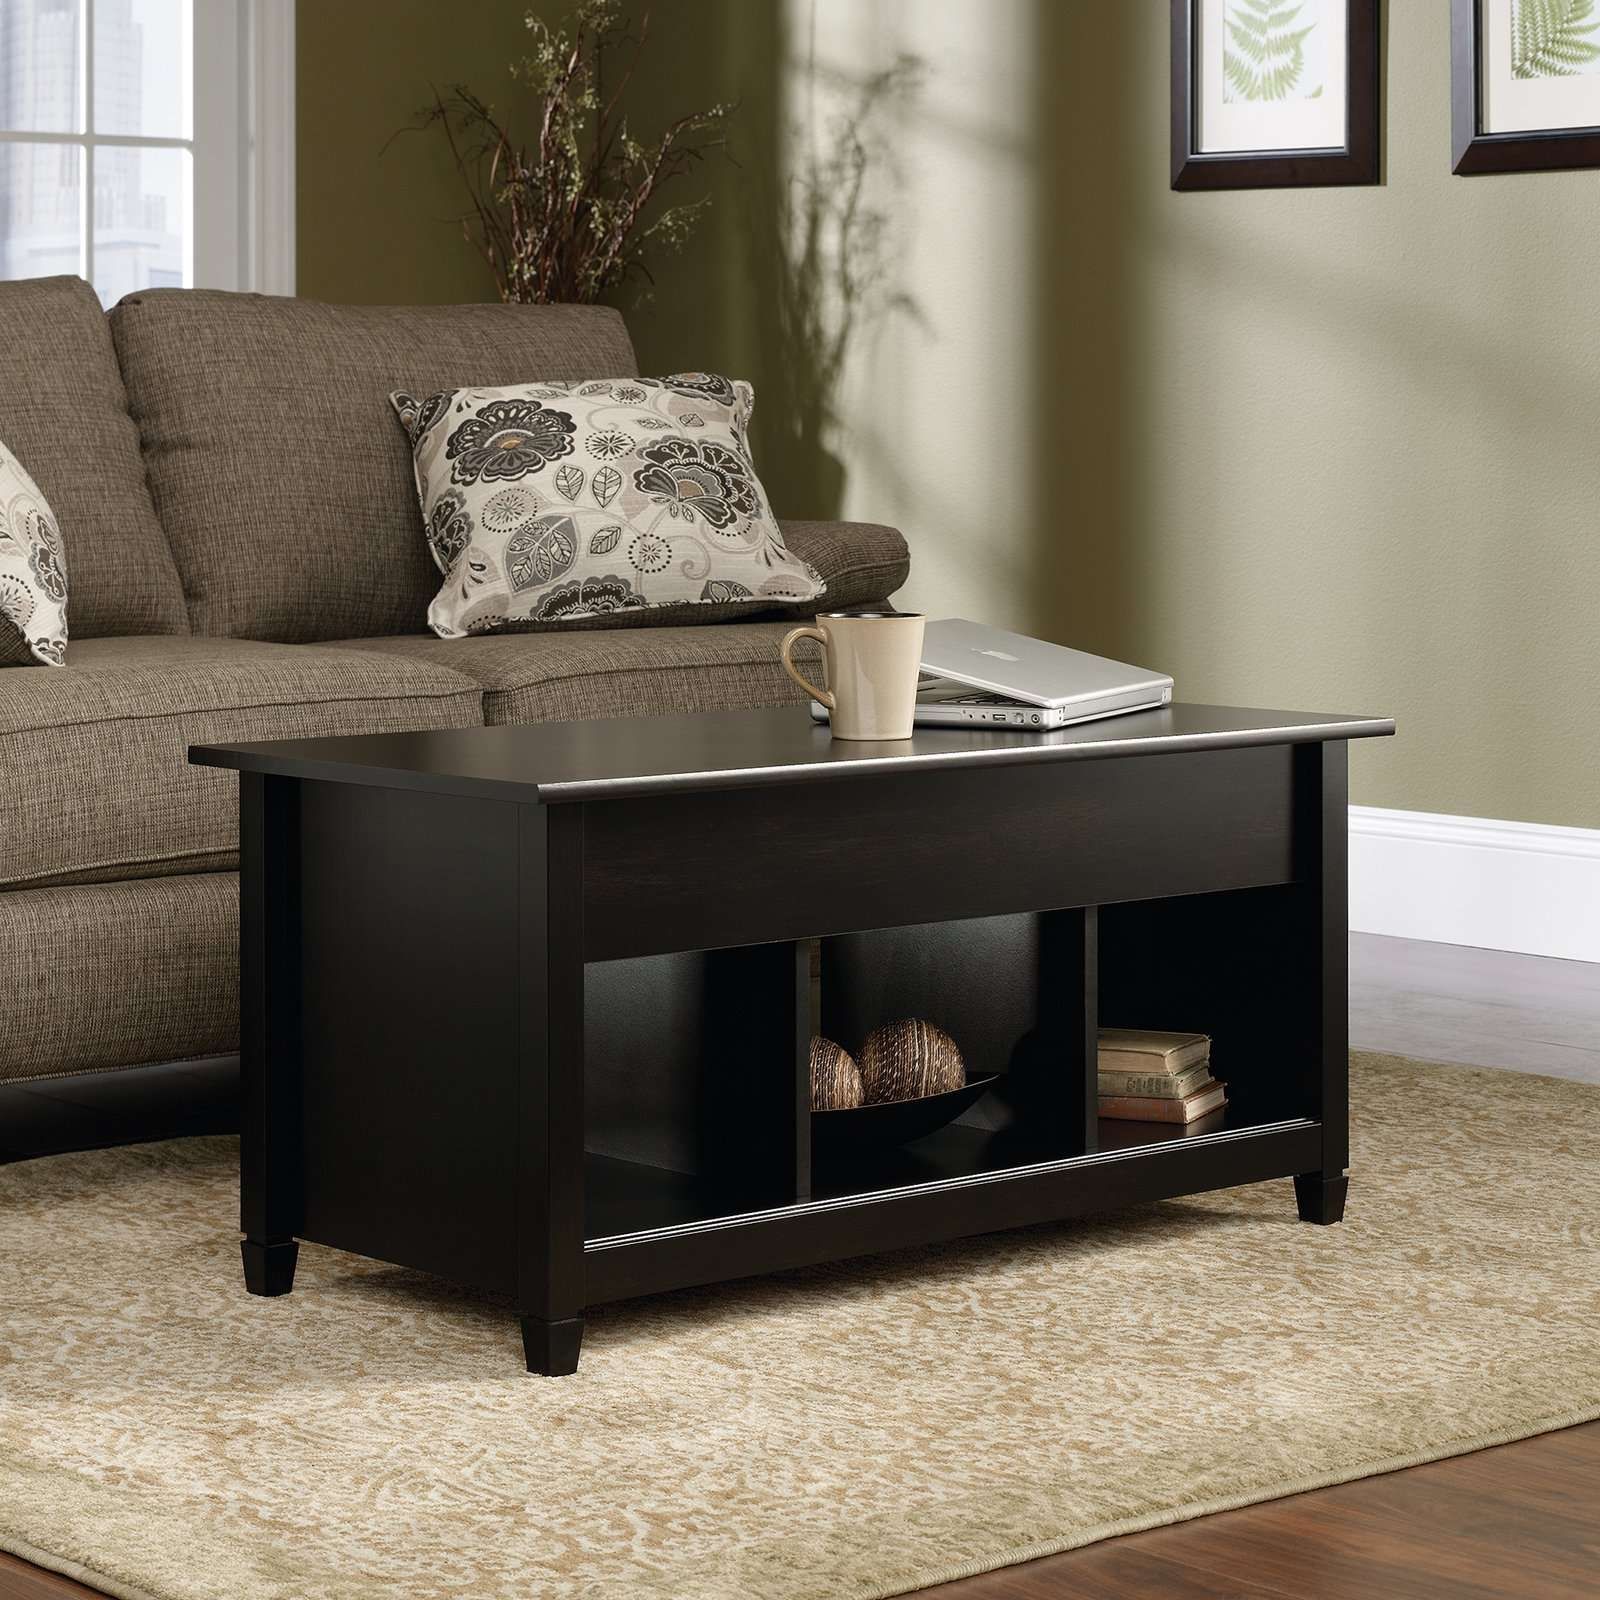 Latest Black Coffee Tables With Storage Inside Coffee Table : Awesome Coffee Table With Storage Round Wood Coffee (View 1 of 20)